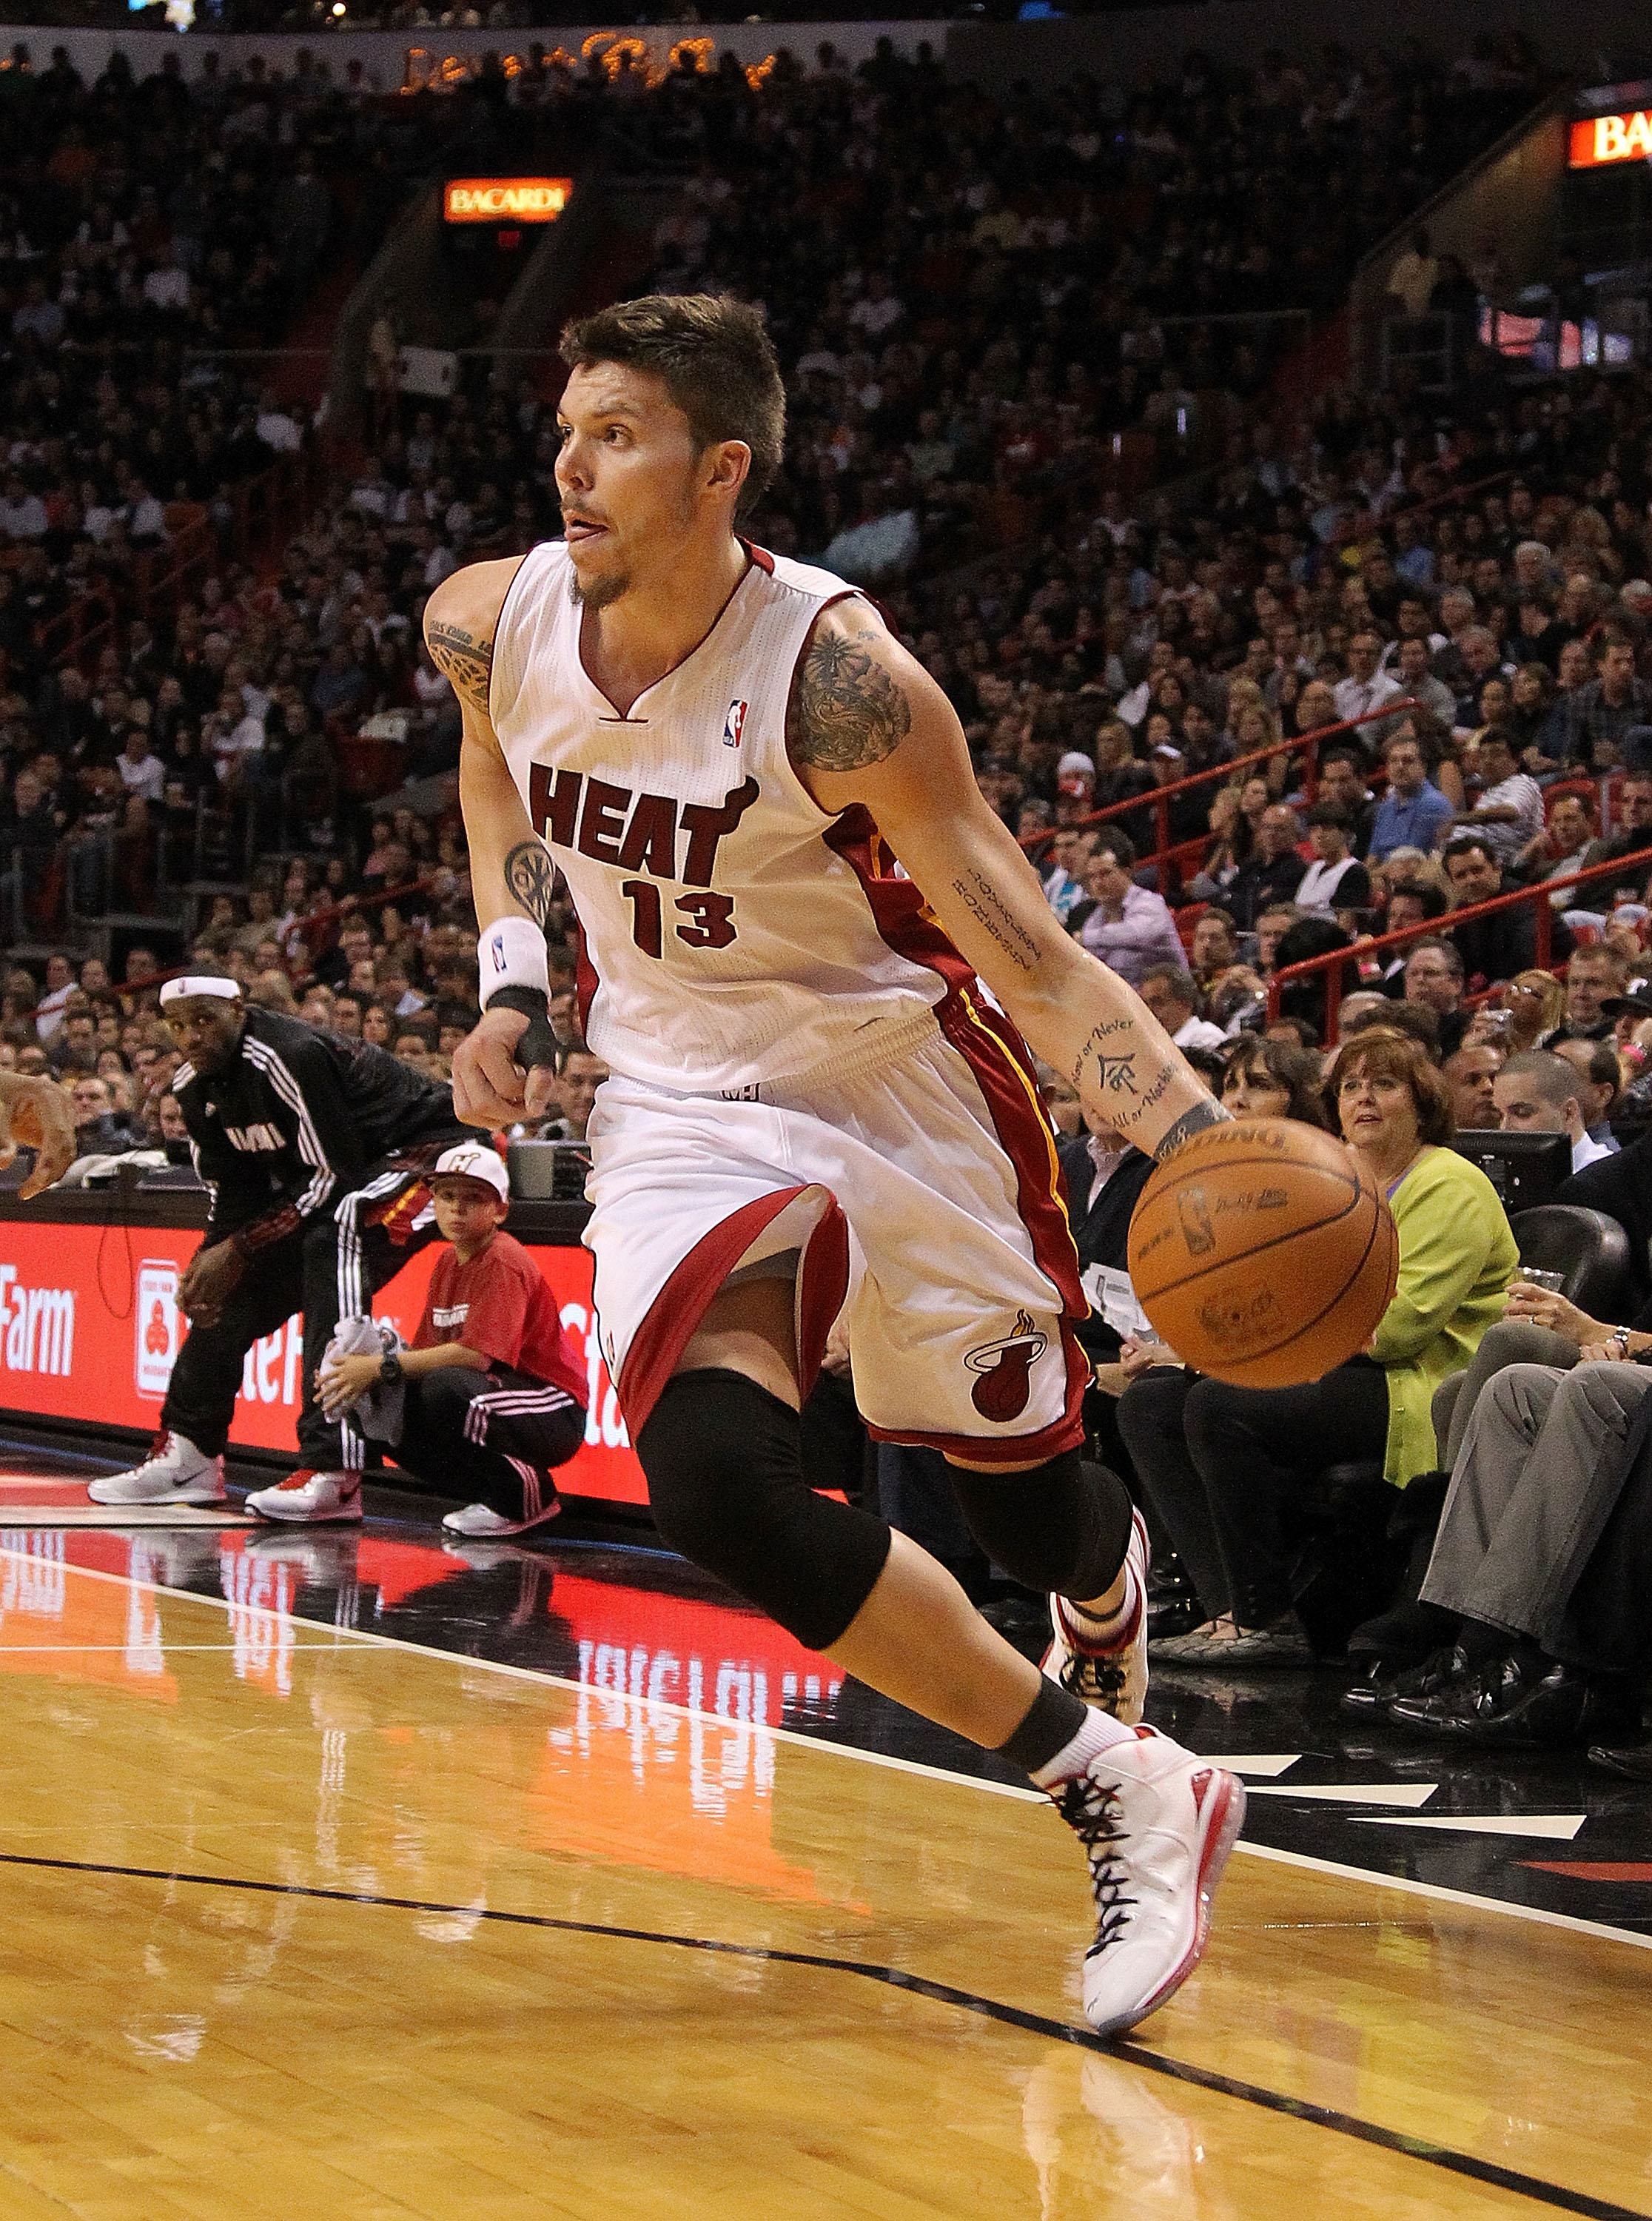 MIAMI, FL - JANUARY 22:  Mike Miller #13 of the Miami Heat dribbles into the lane during a game against the Toronto Raptors at American Airlines Arena on January 22, 2011 in Miami, Florida. NOTE TO USER: User expressly acknowledges and agrees that, by dow